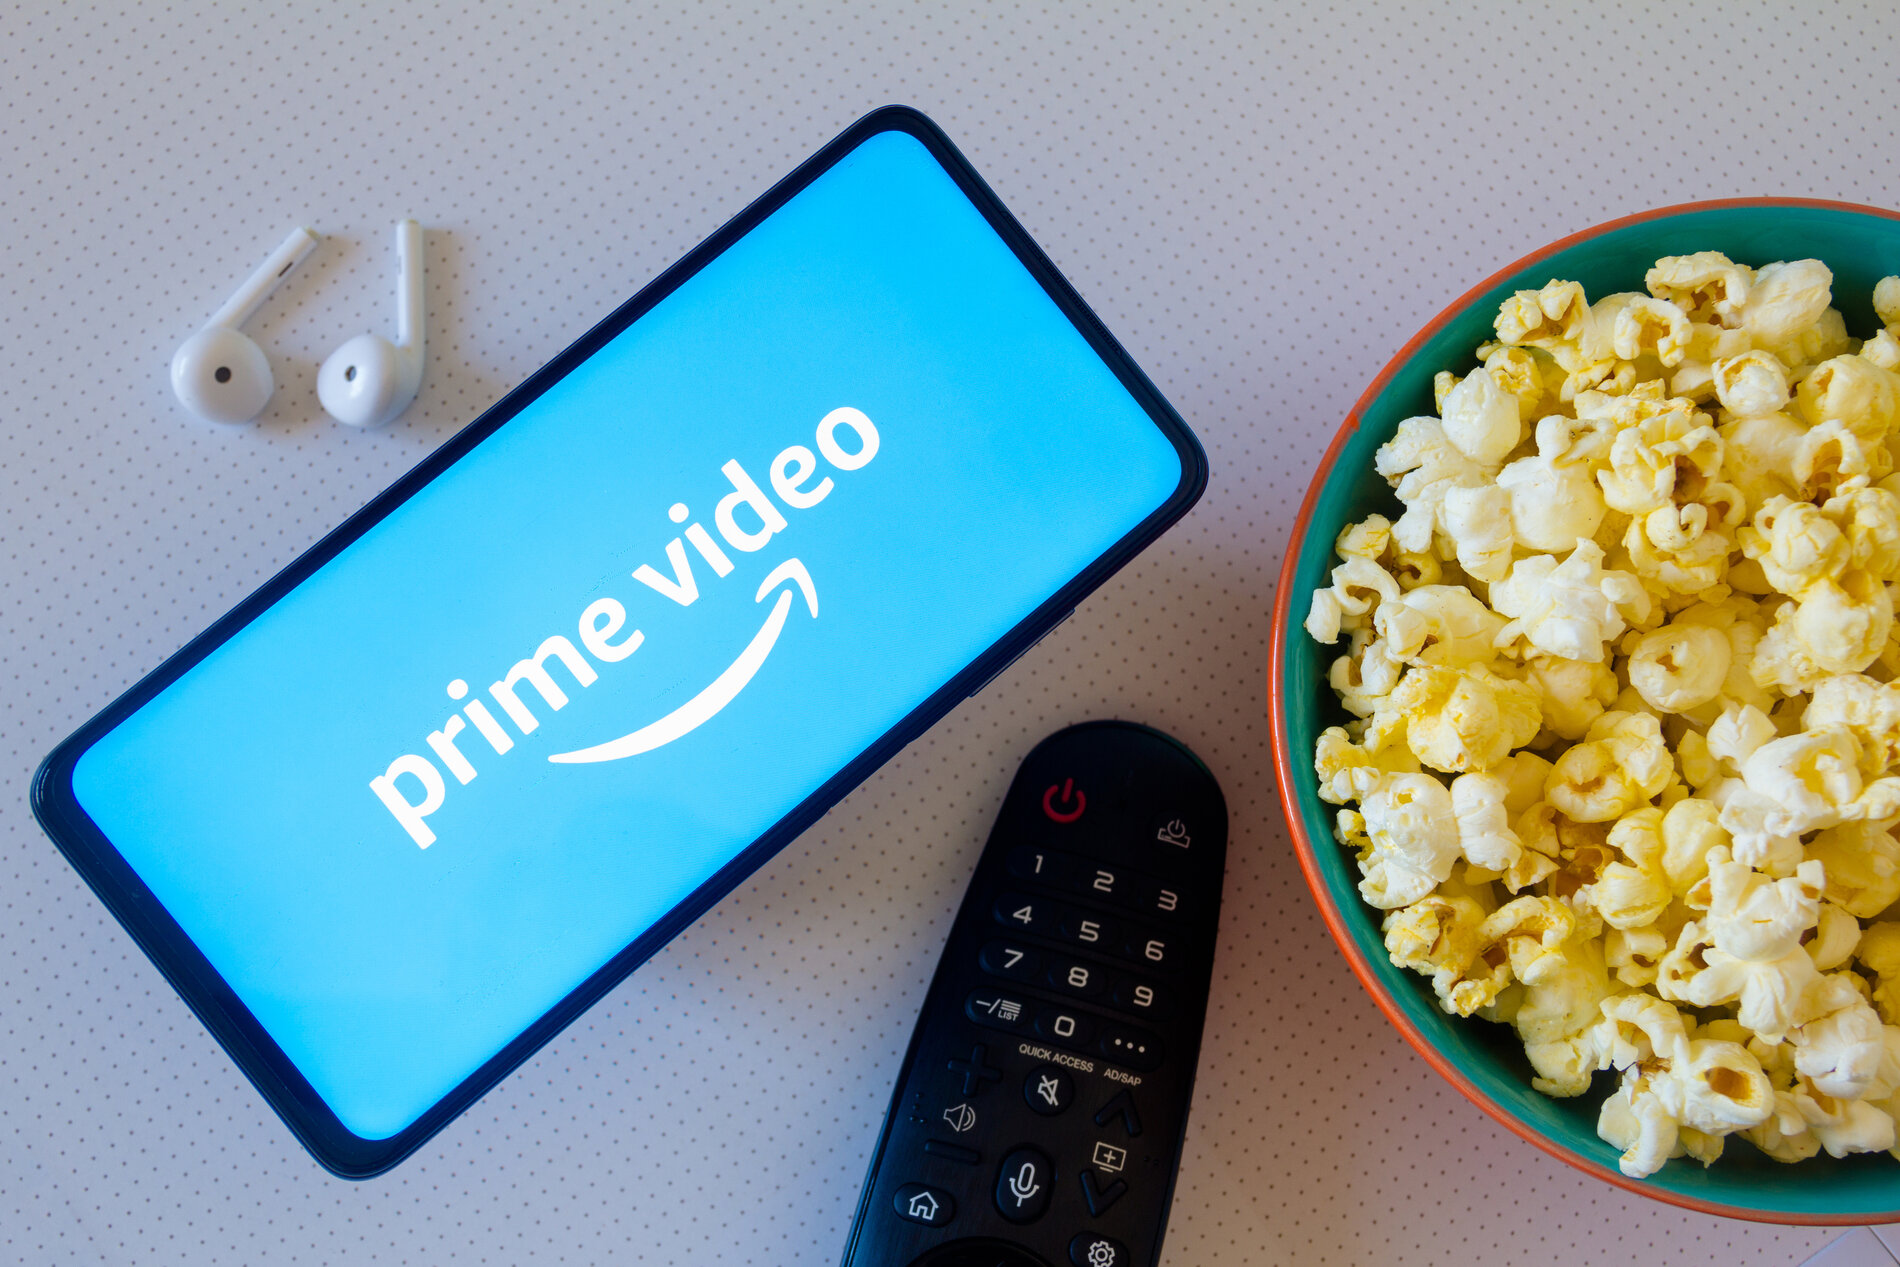 How To Watch Amazon Prime Video Free?